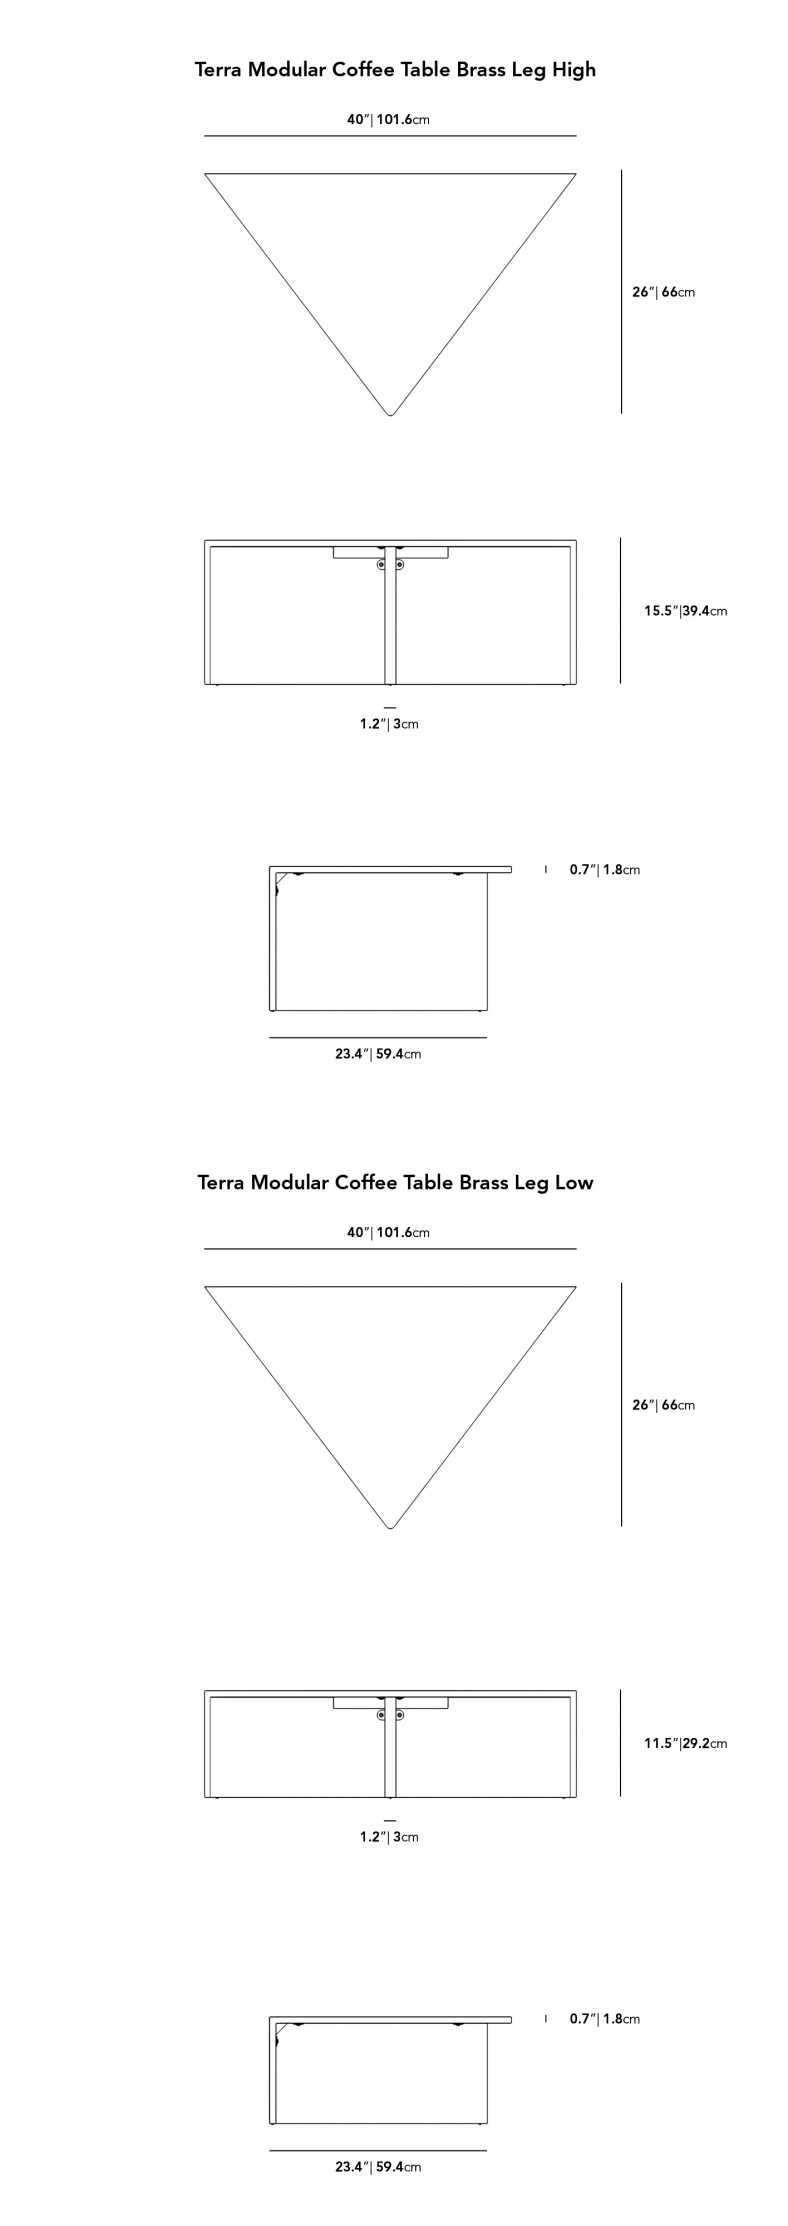 Dimensions for Terra Modular Coffee Table